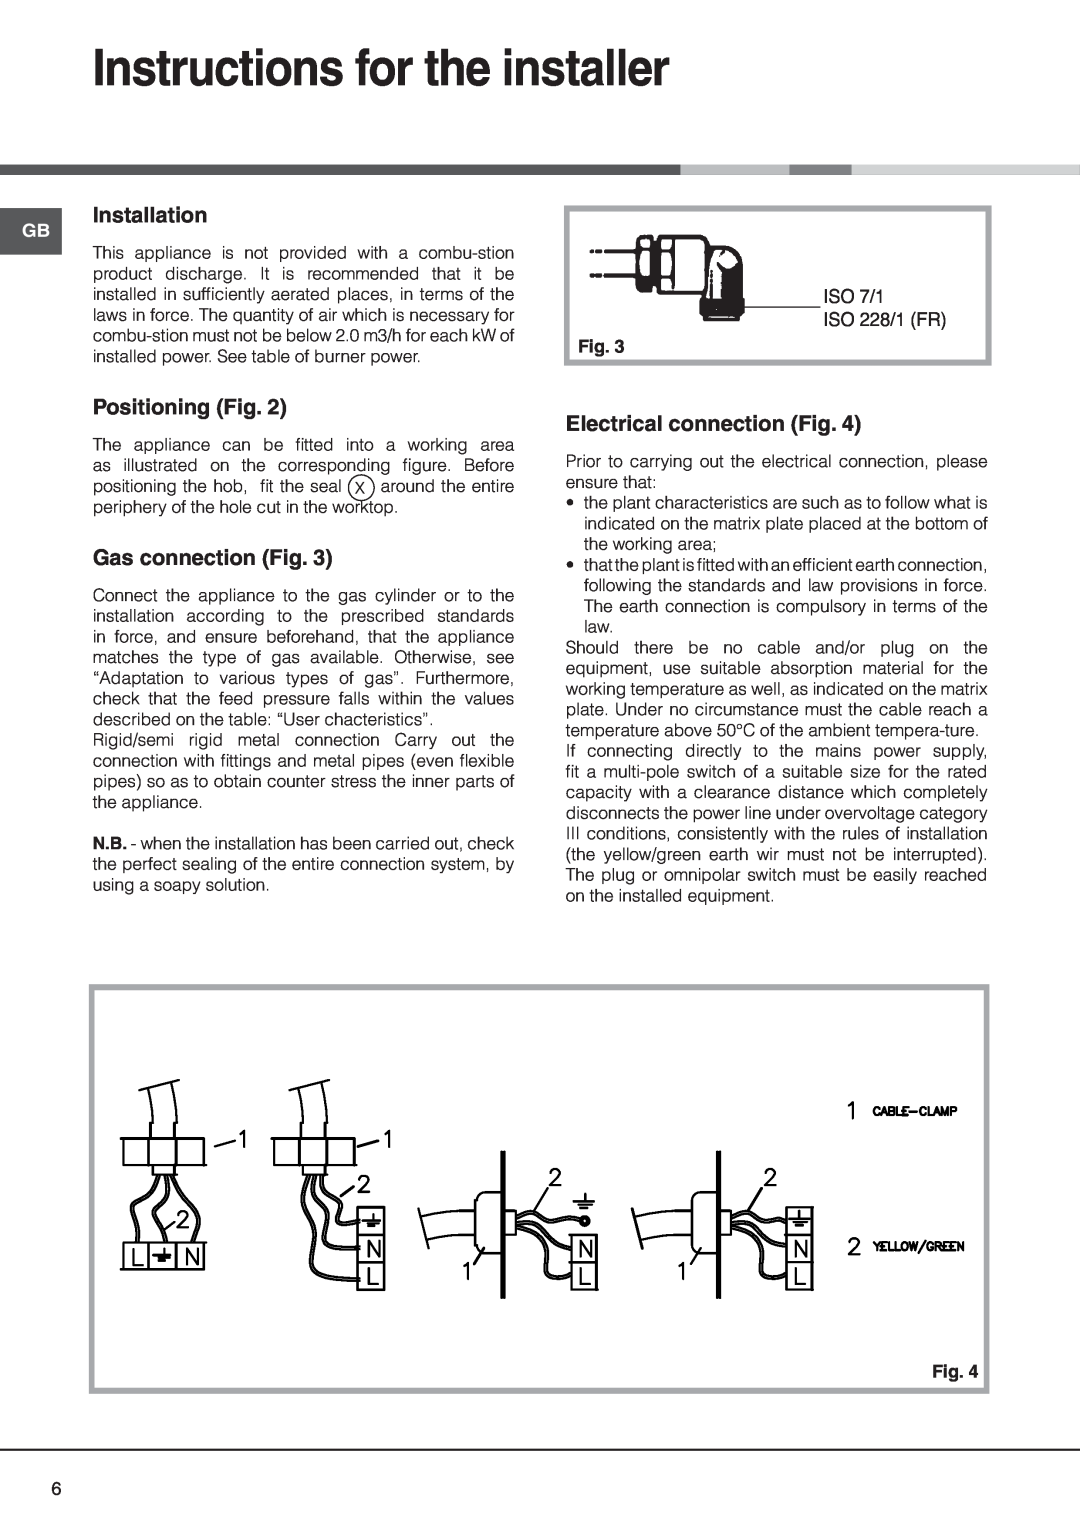 Hotpoint G320GIX, G3201LIX Instructions for the installer, Positioning Fig, Gas connection Fig, Electrical connection Fig 